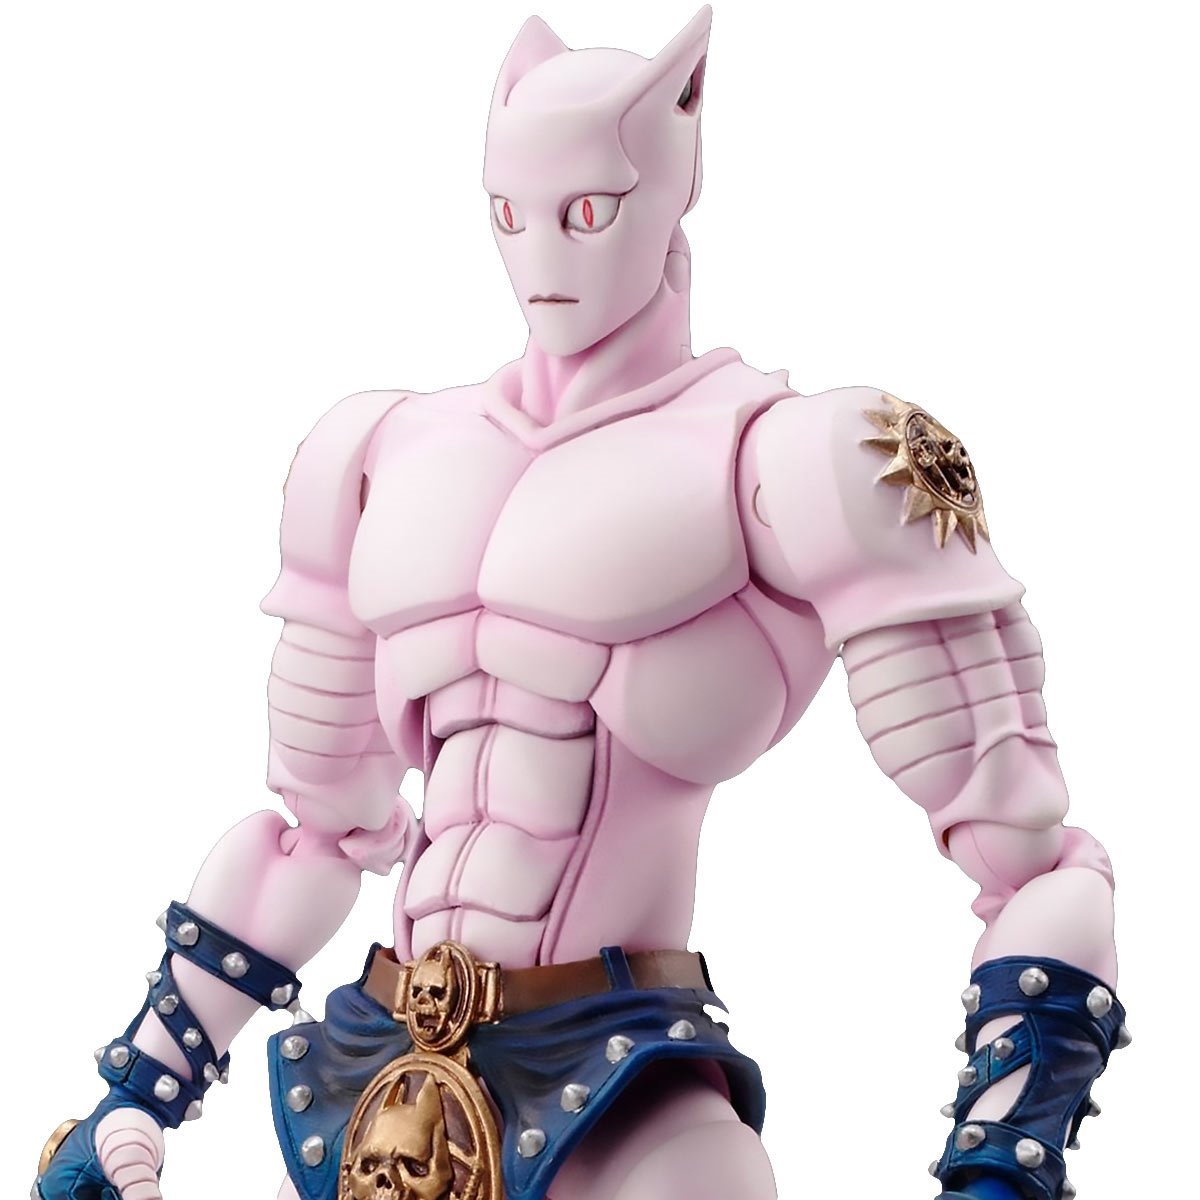 GoodSmile_US on X: MEDICOS ENTERTAINMENT's Chozokado KILLER QUEEN Second  from Jojo's Bizarre Adventure: Diamond is Unbreakable is up for preorder  now at the GOODSMILE ONLINE SHOP US in the Partner Products section!